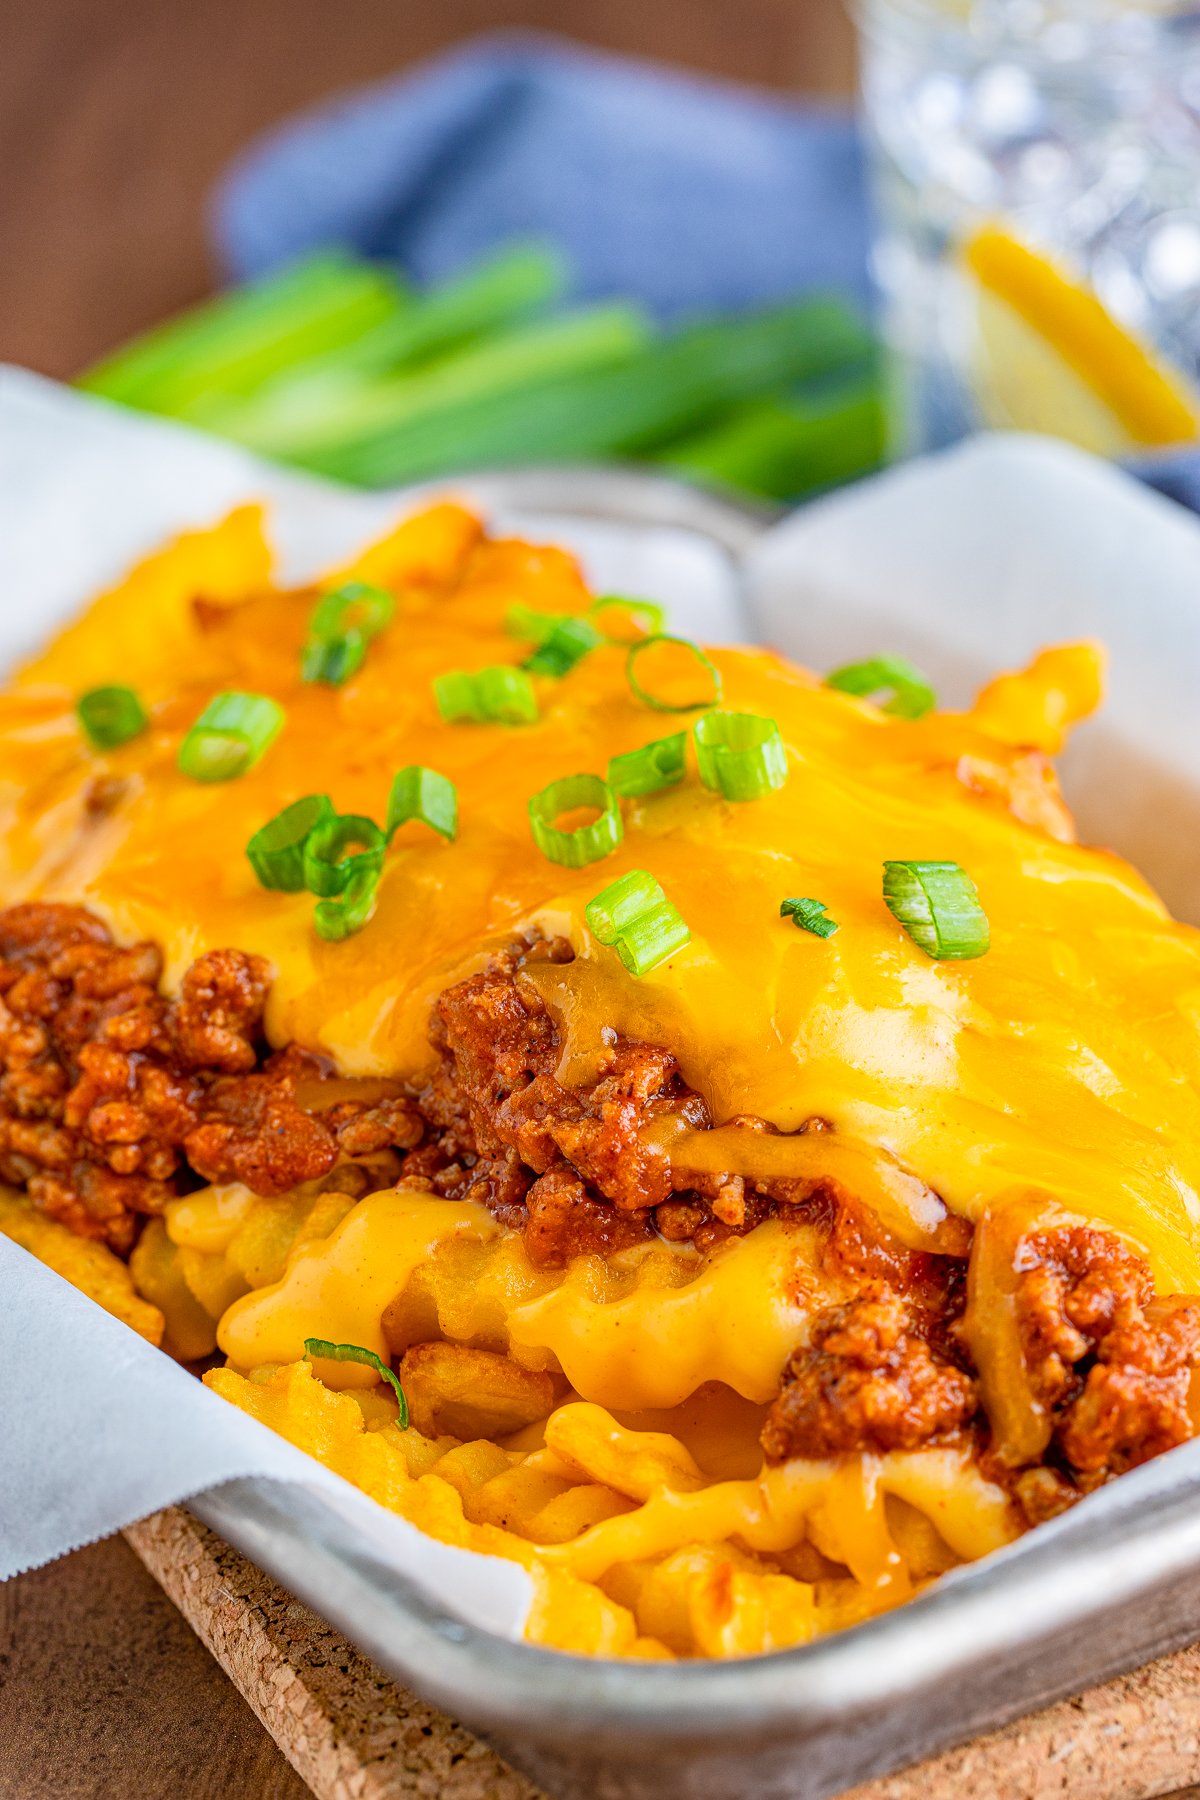 Side view showing layers of Chili Cheese Fries.